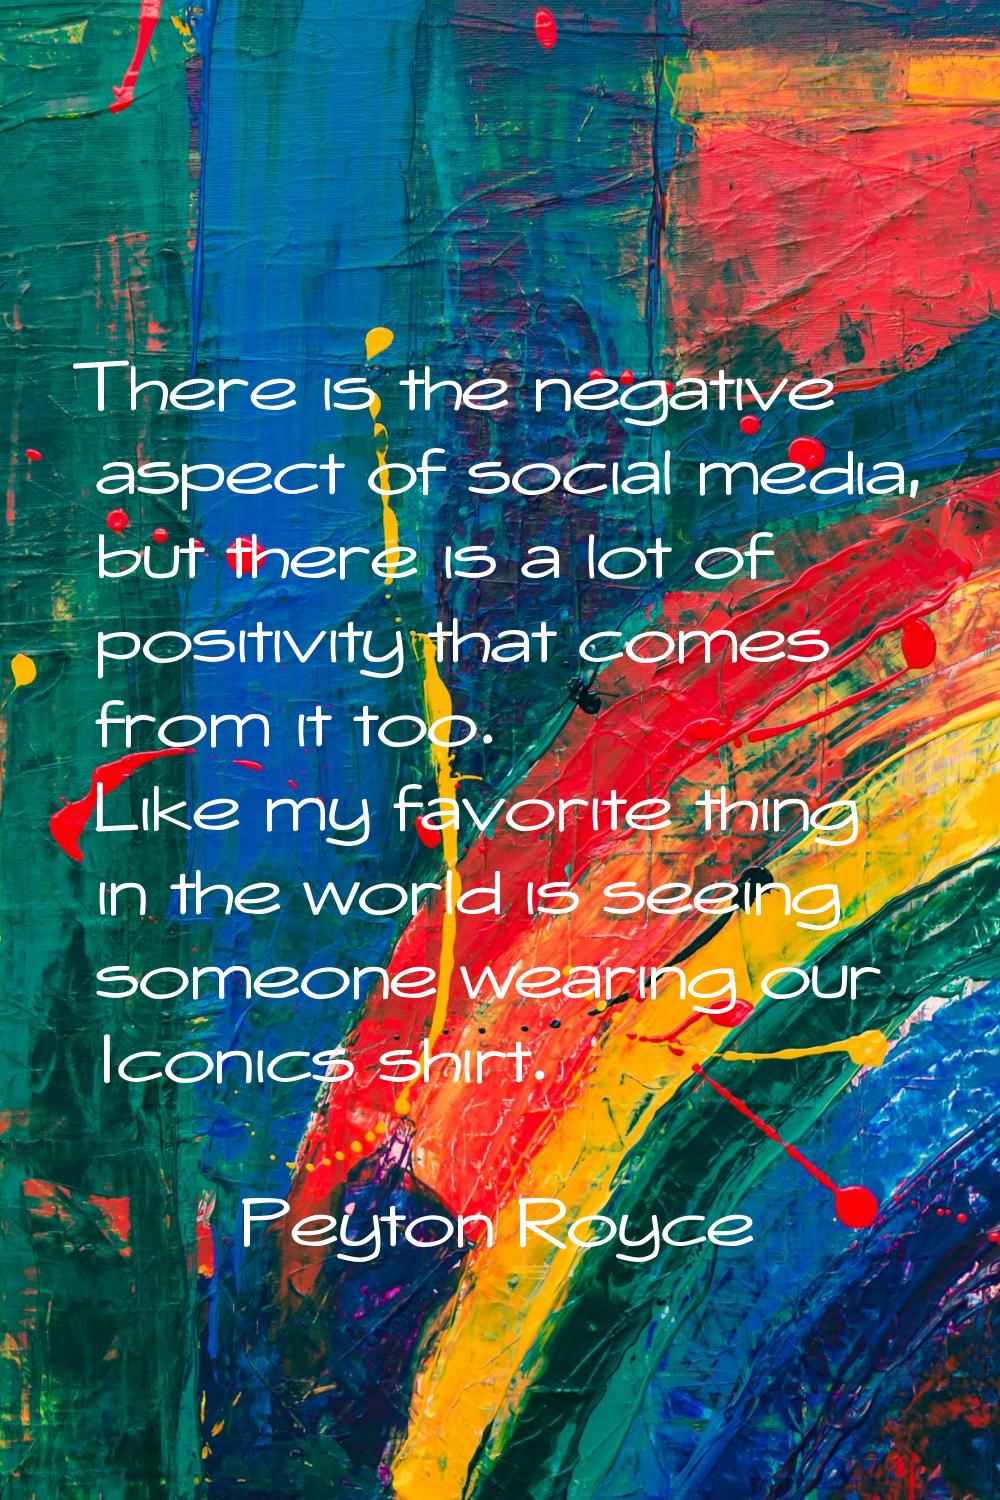 There is the negative aspect of social media, but there is a lot of positivity that comes from it t